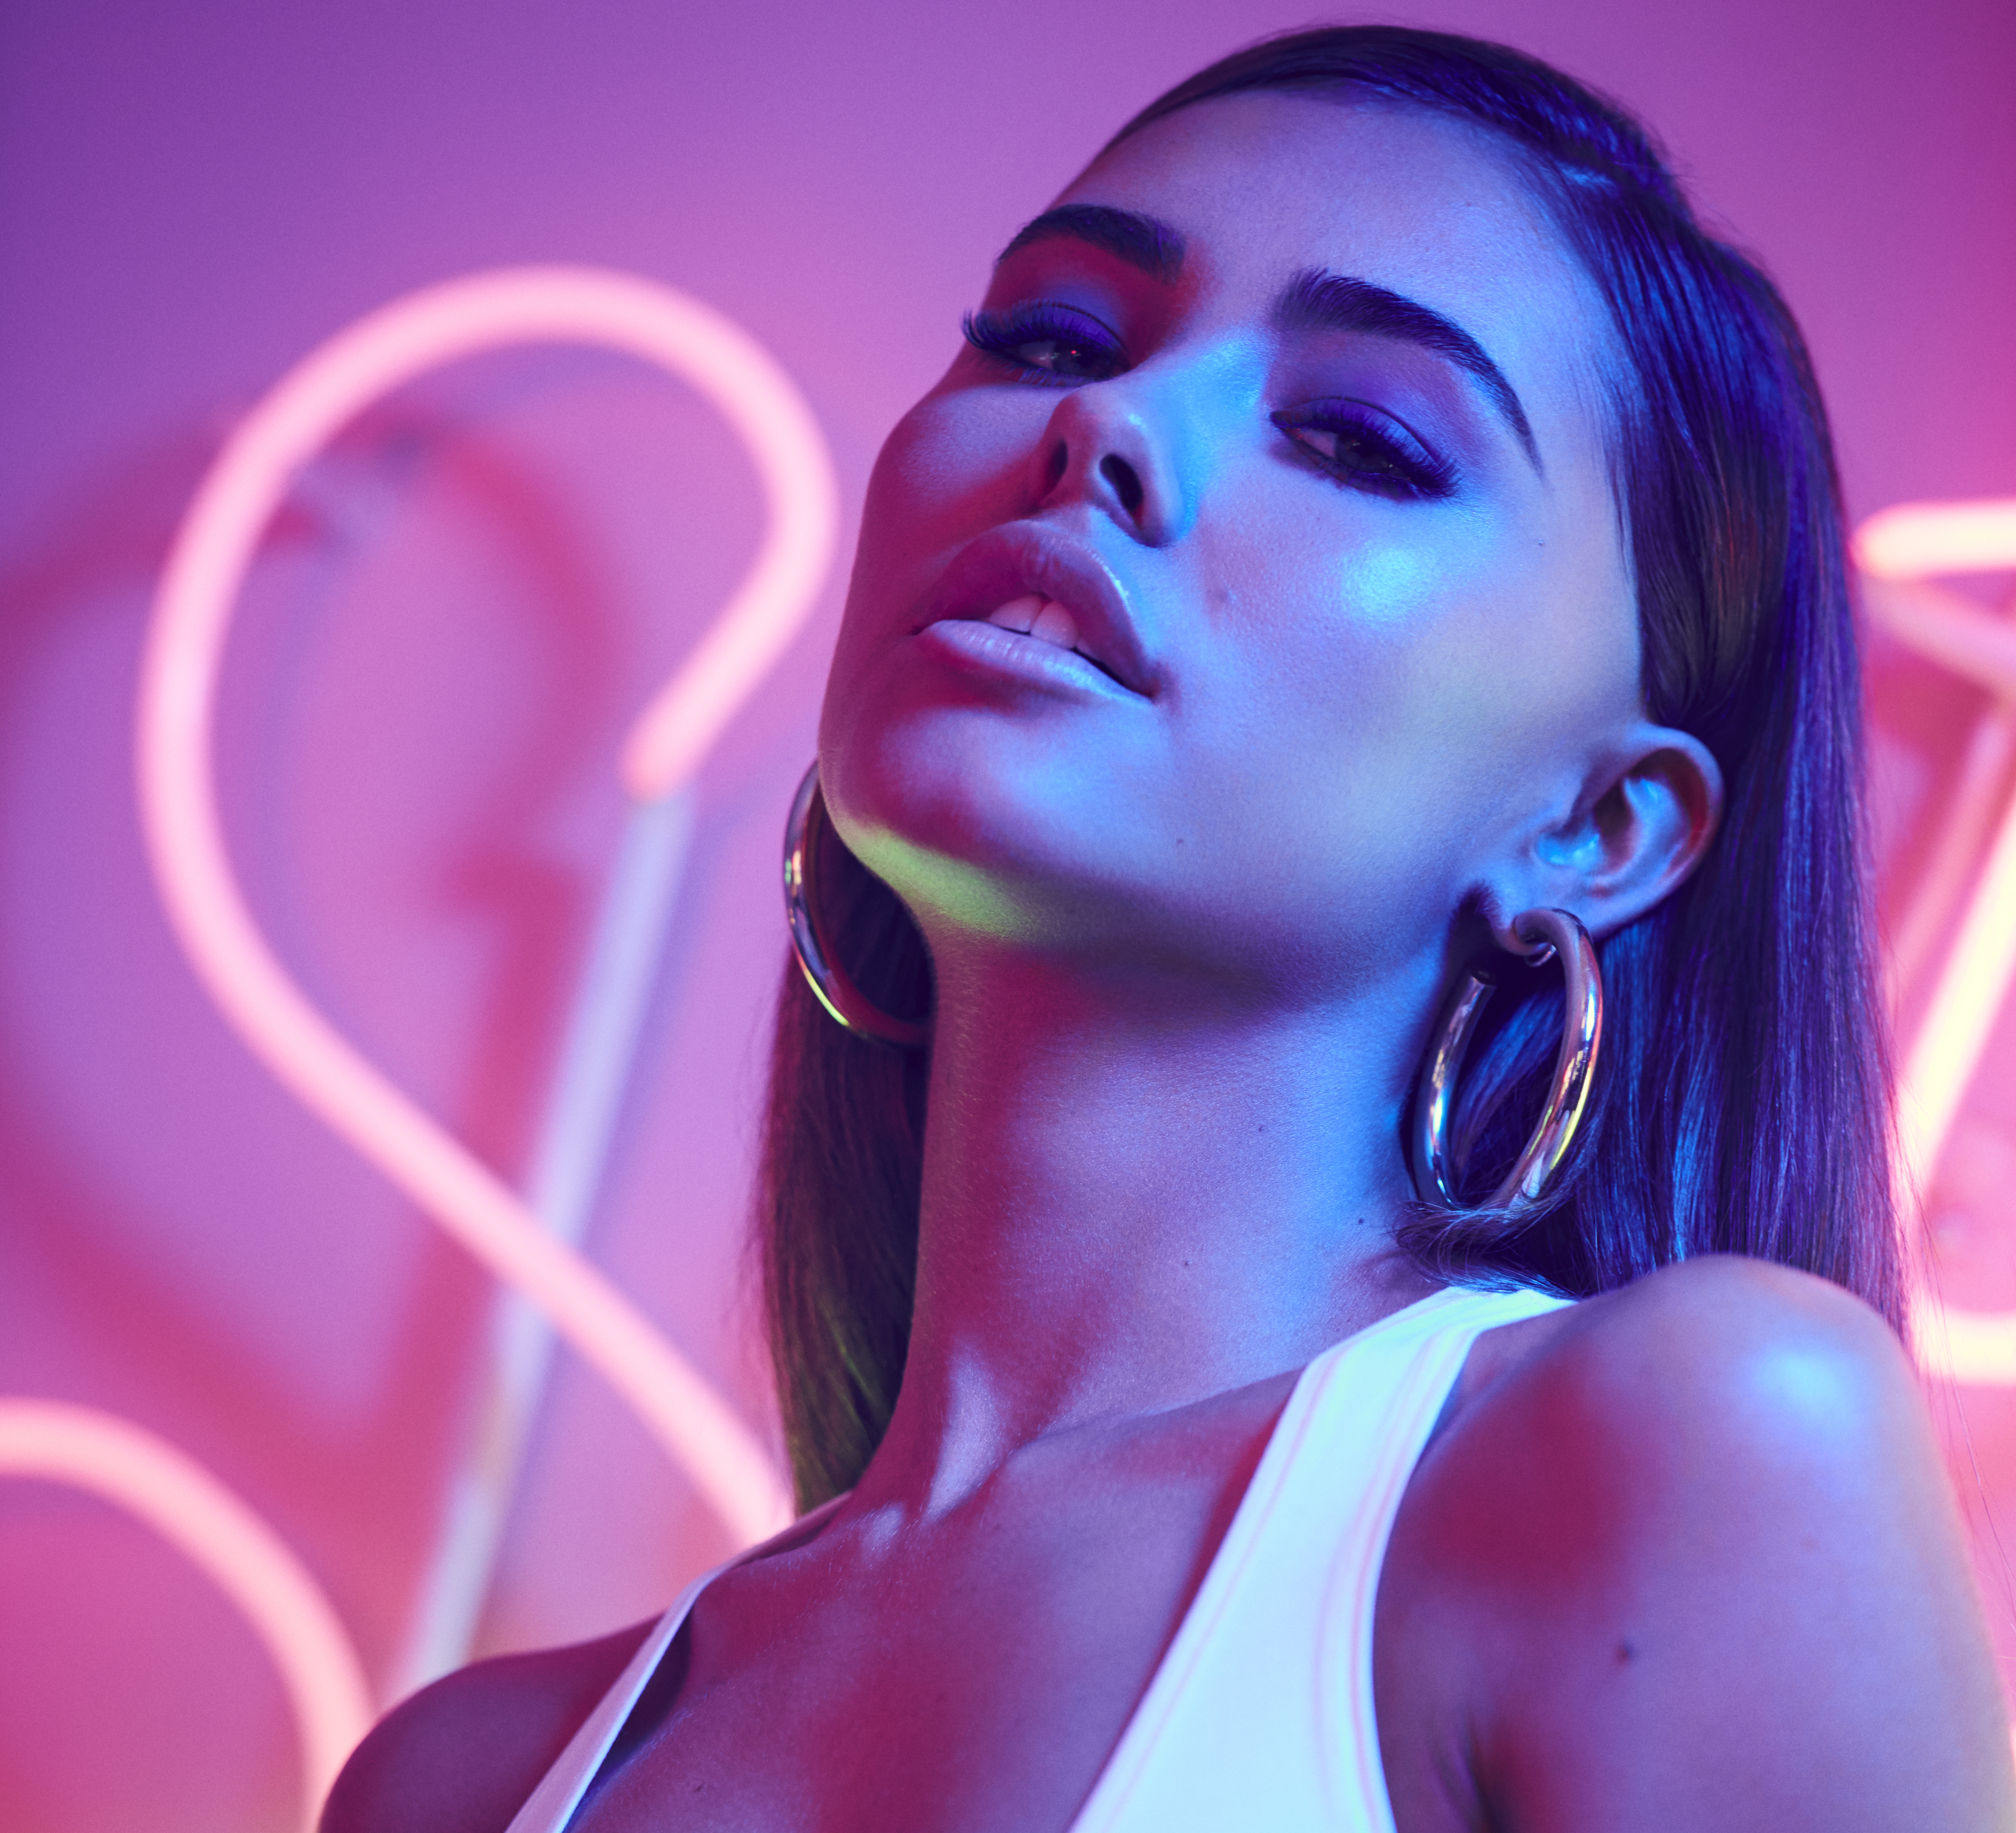 Madison Beer for ELITE DAILY by Eric Ray Davidson